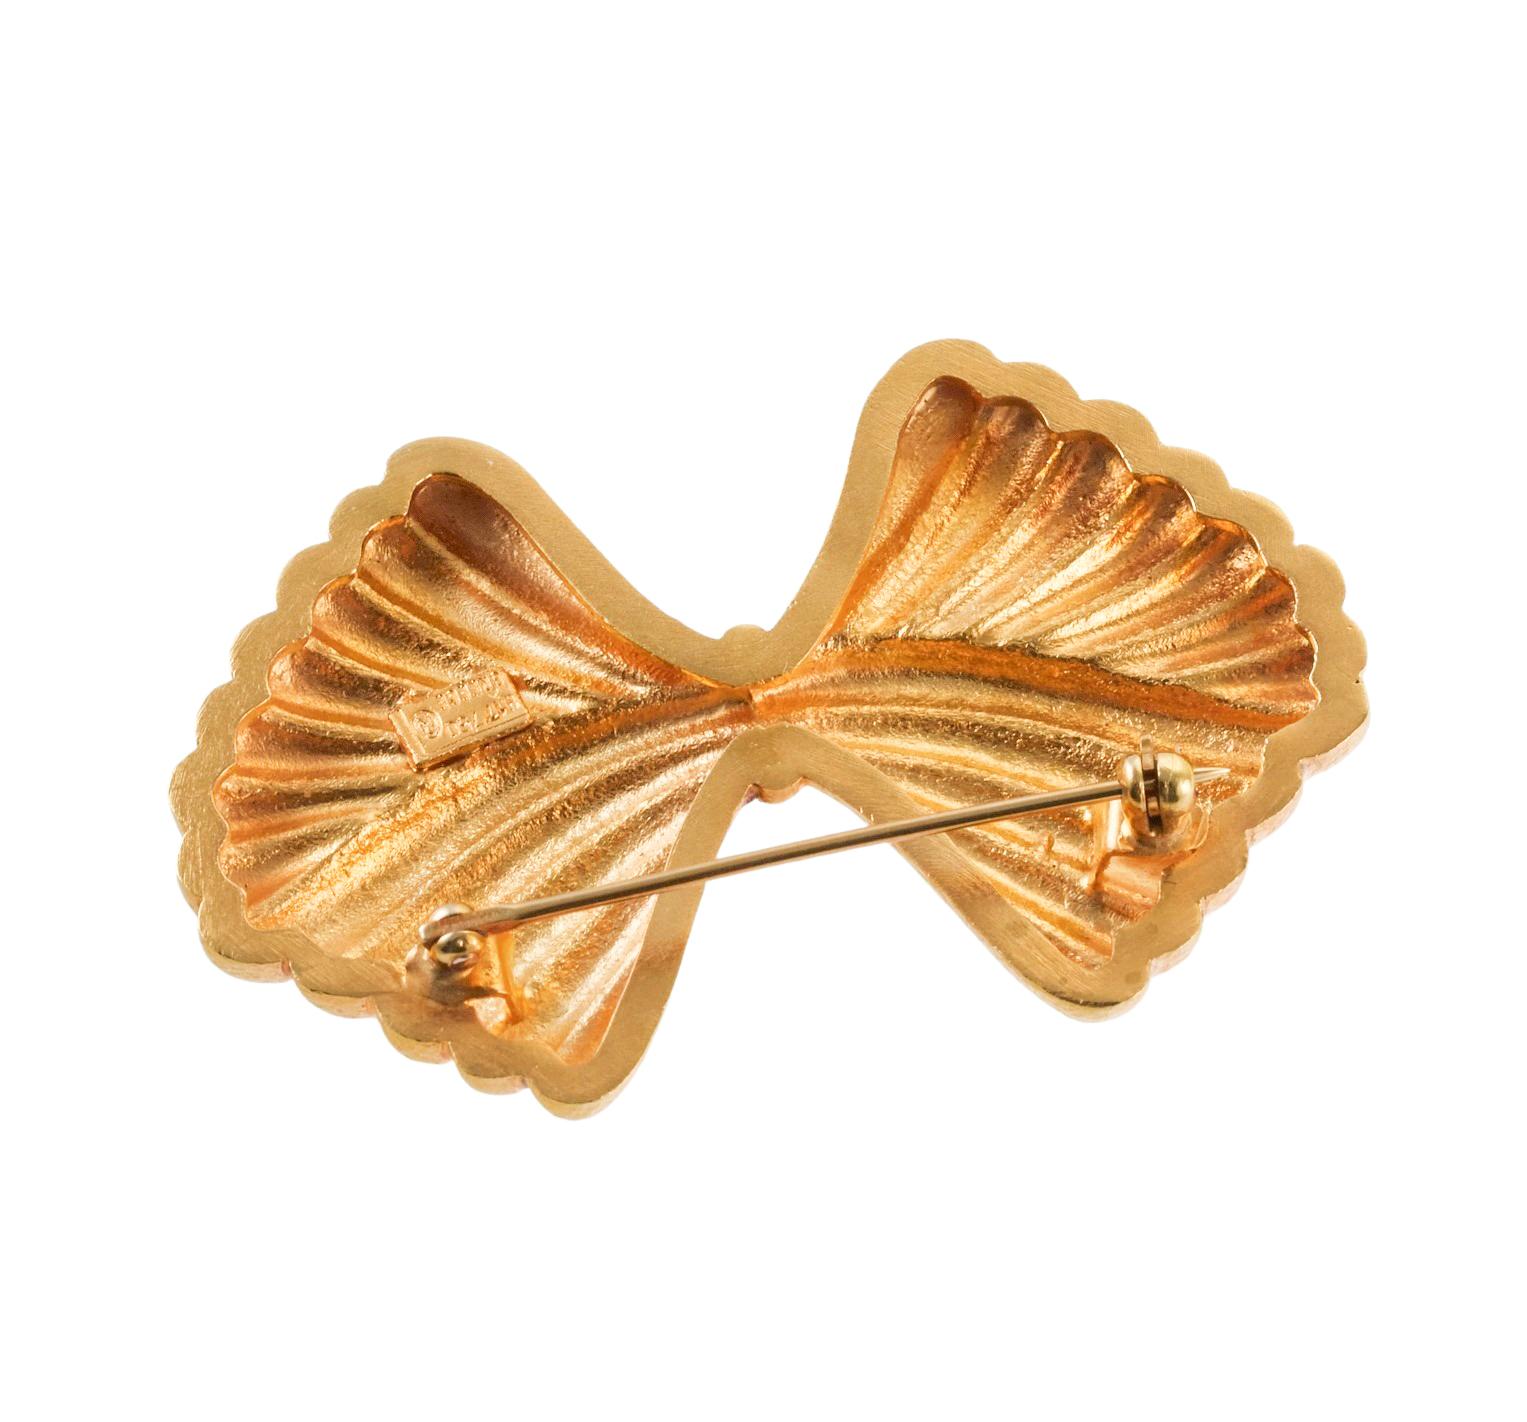 18k yellow gold bow brooch, crafted by Ilias Lalaounis of Greece, featuring polished and hand hammered finish. Brooch measures 2